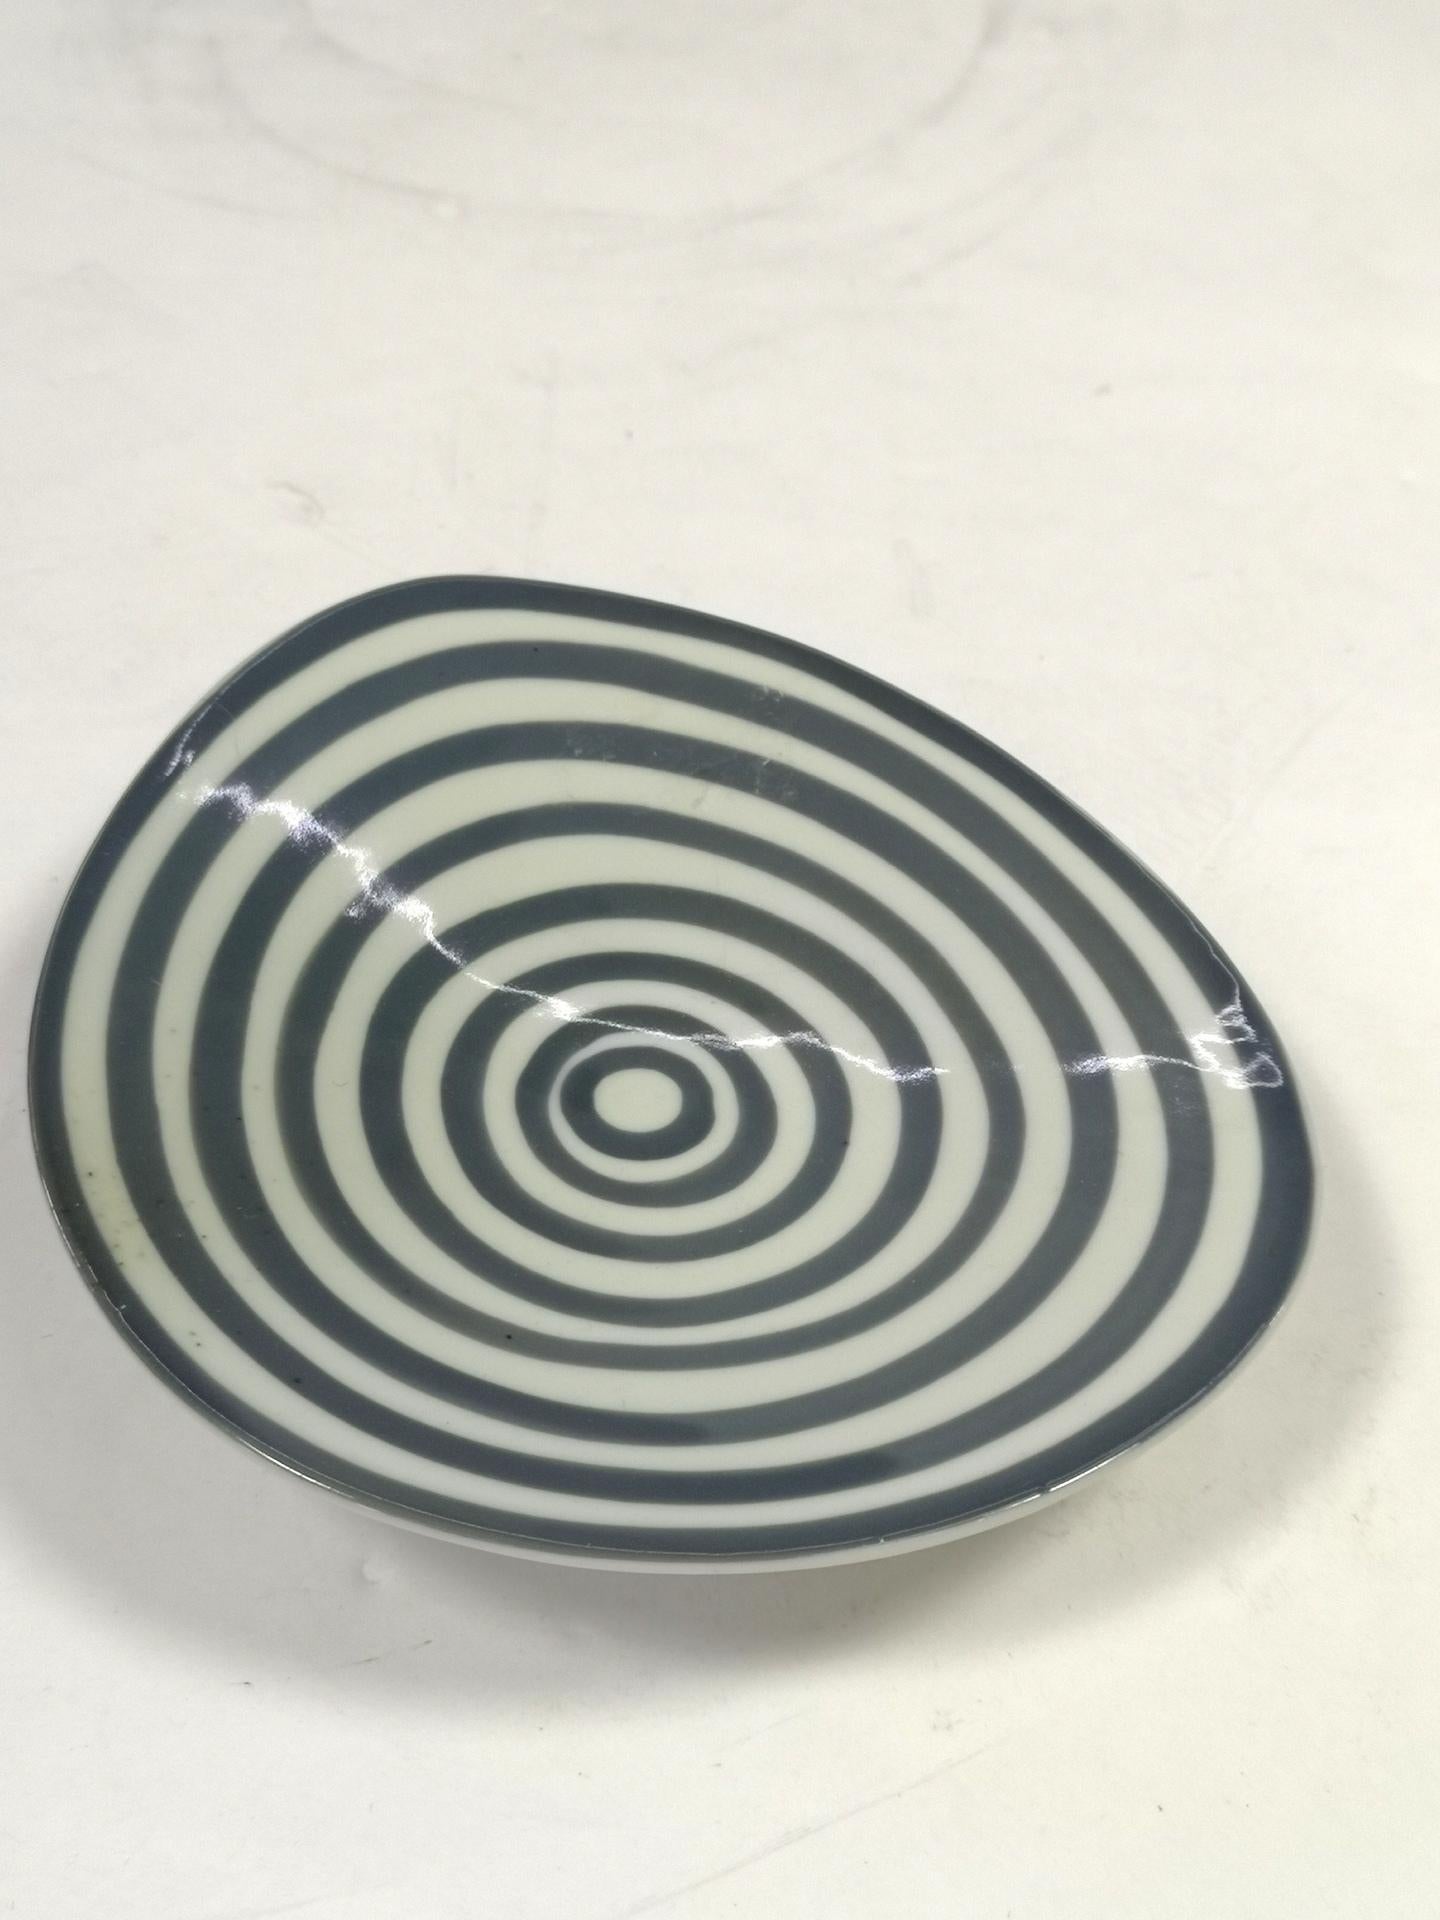 Space Age Royal Dux Czechoslovakian Porcelain Plate with Swirly Mid-Century Pattern, 1960s